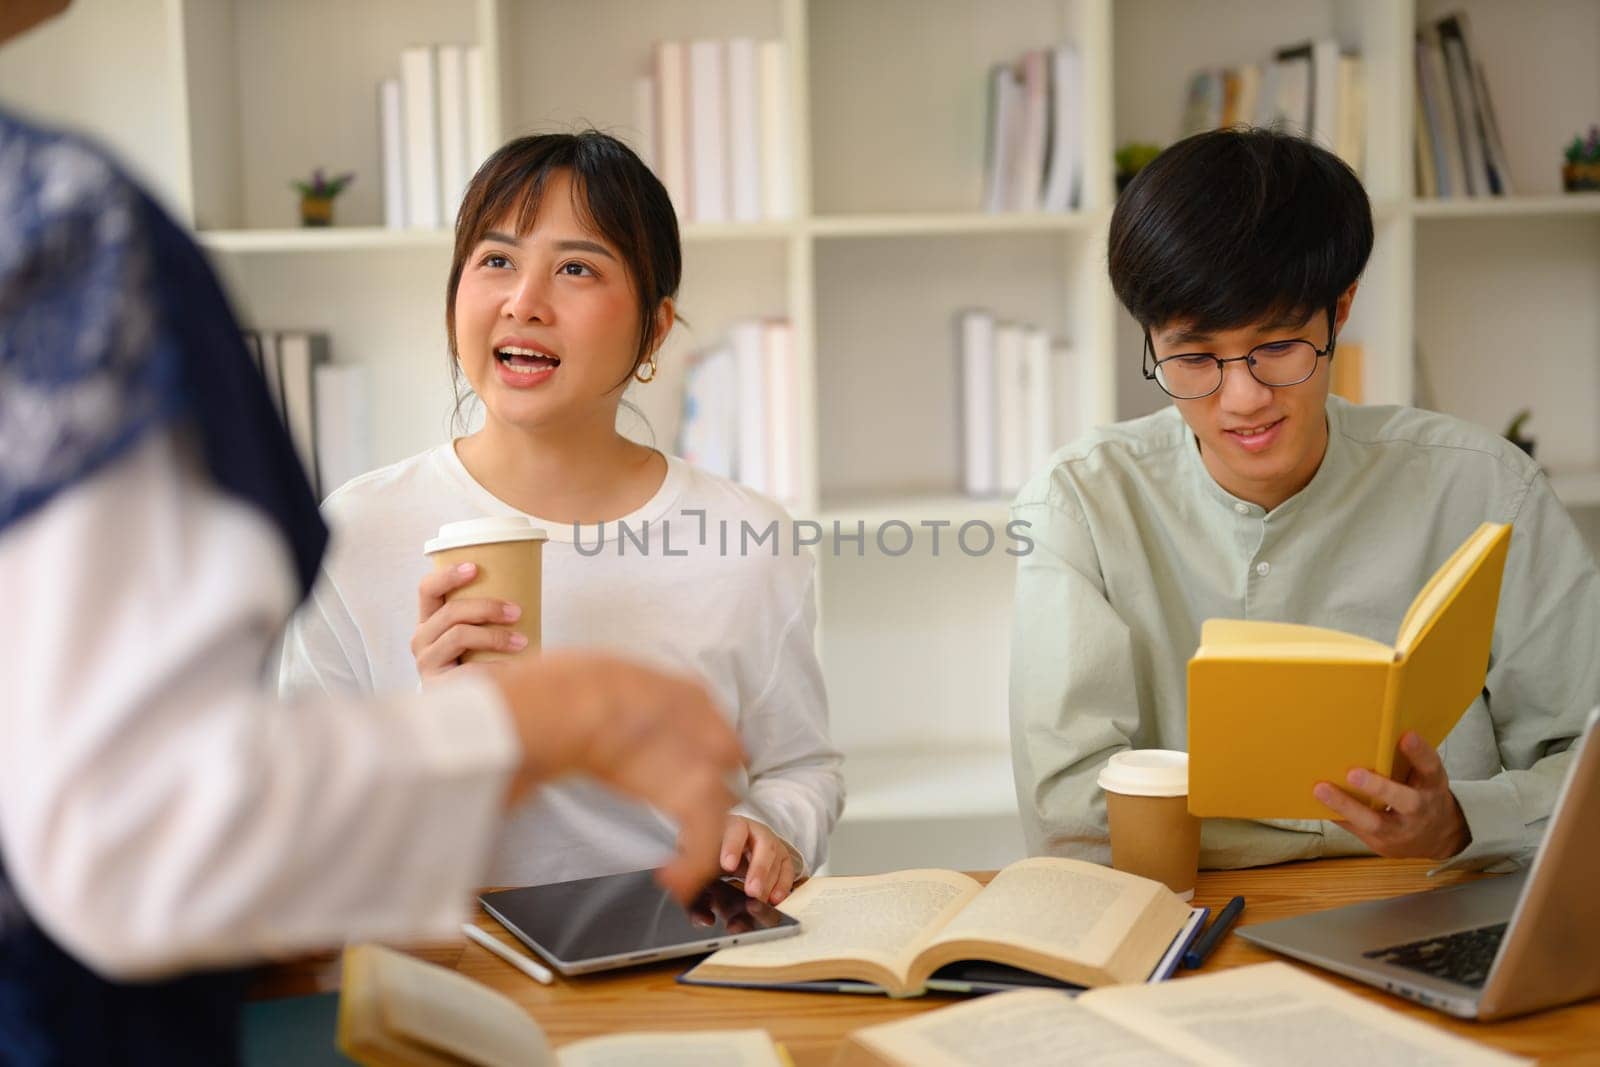 University students working on their assignment with help from teacher by prathanchorruangsak